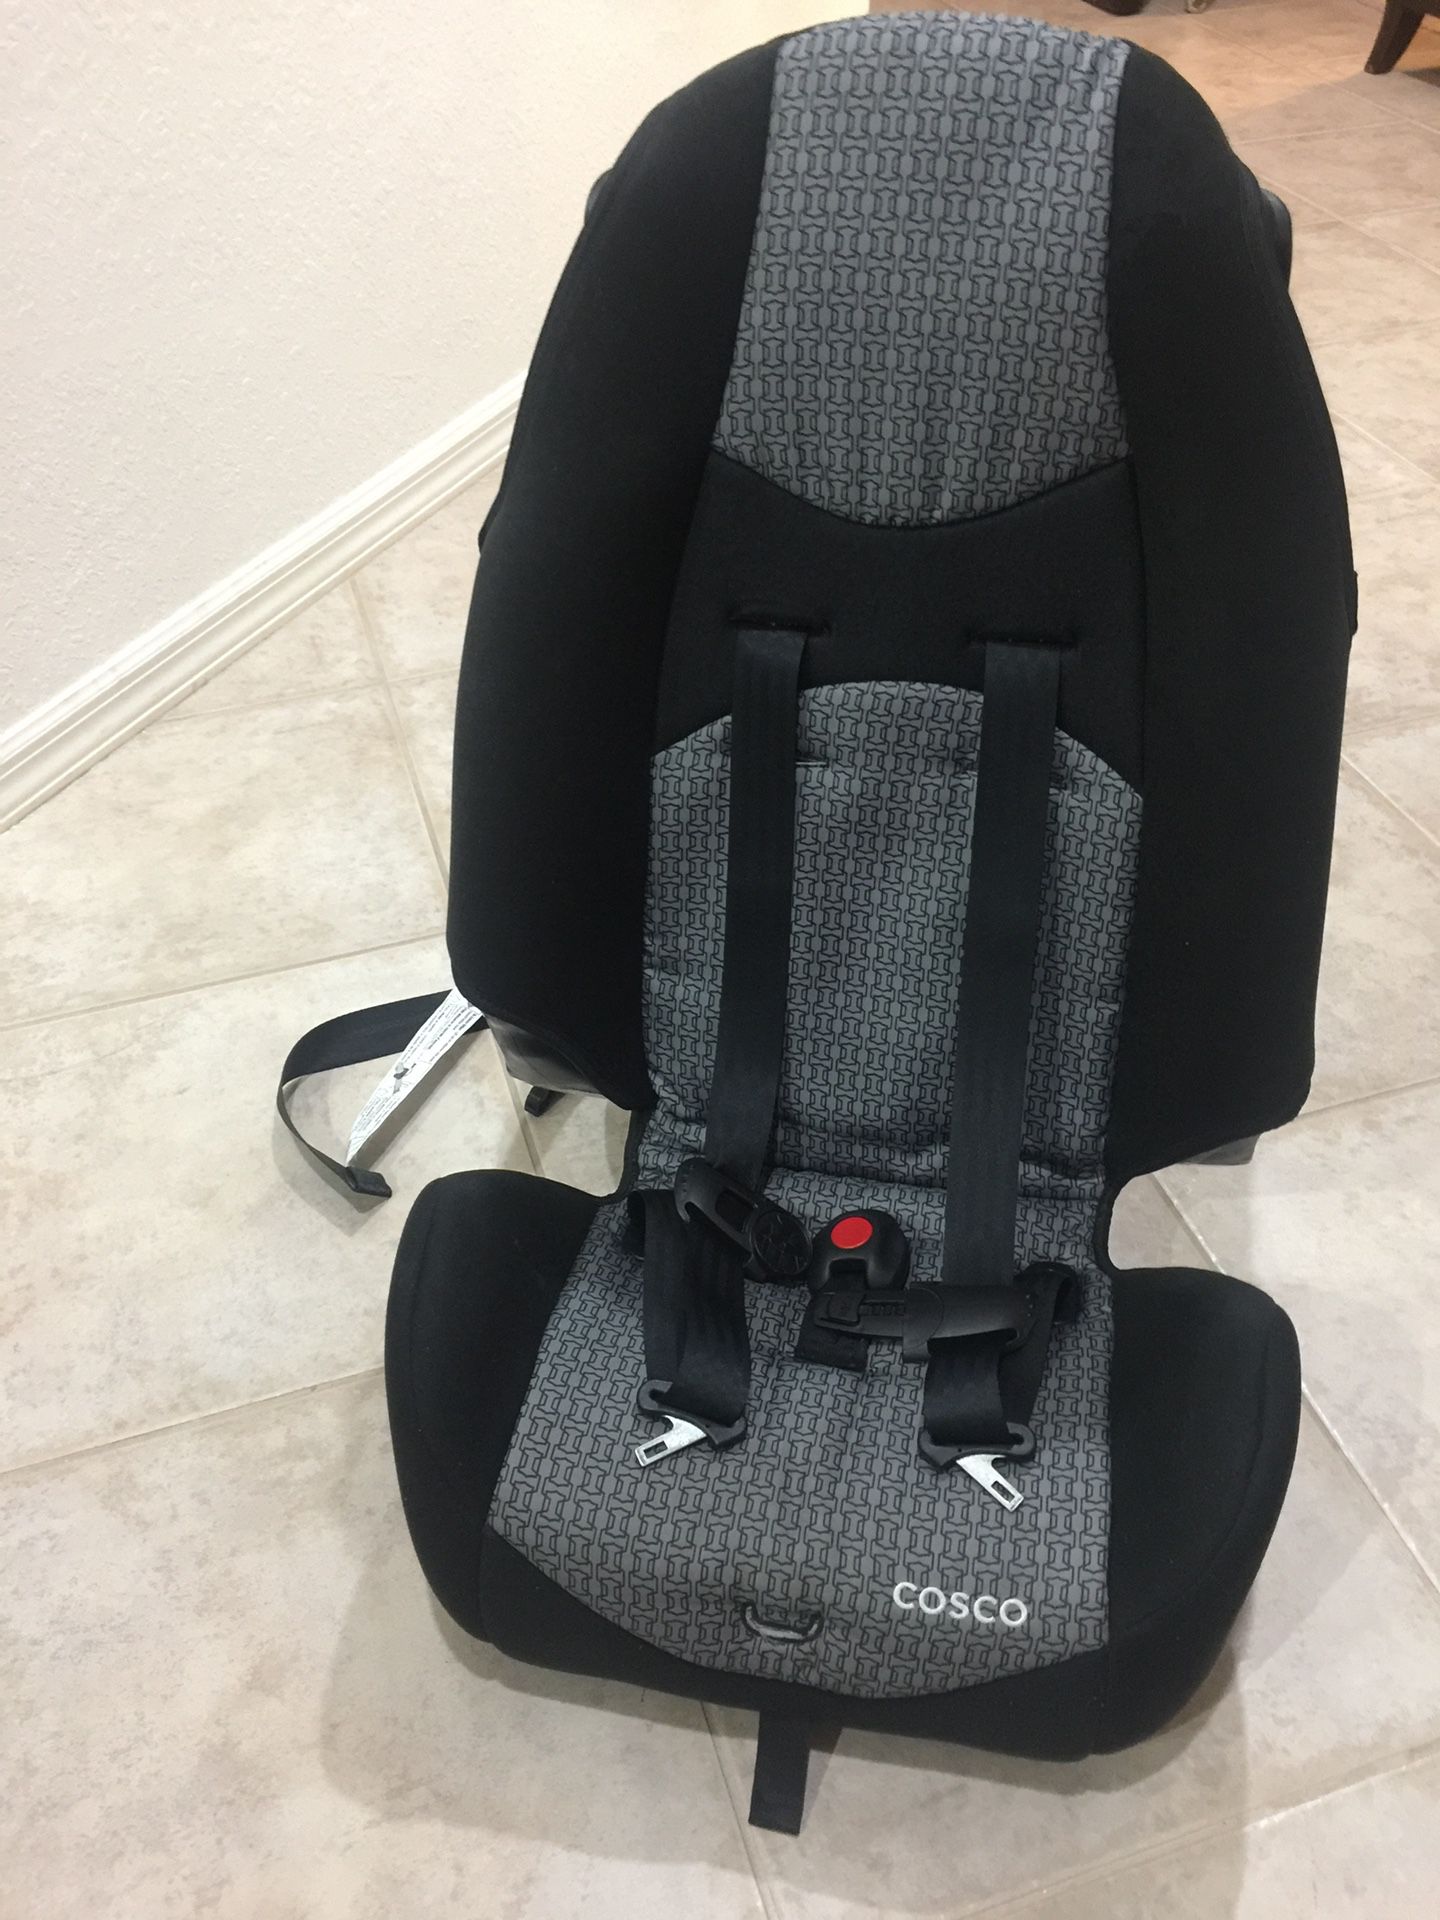 Cosco Like New Car Seat! Very clean, No rips!